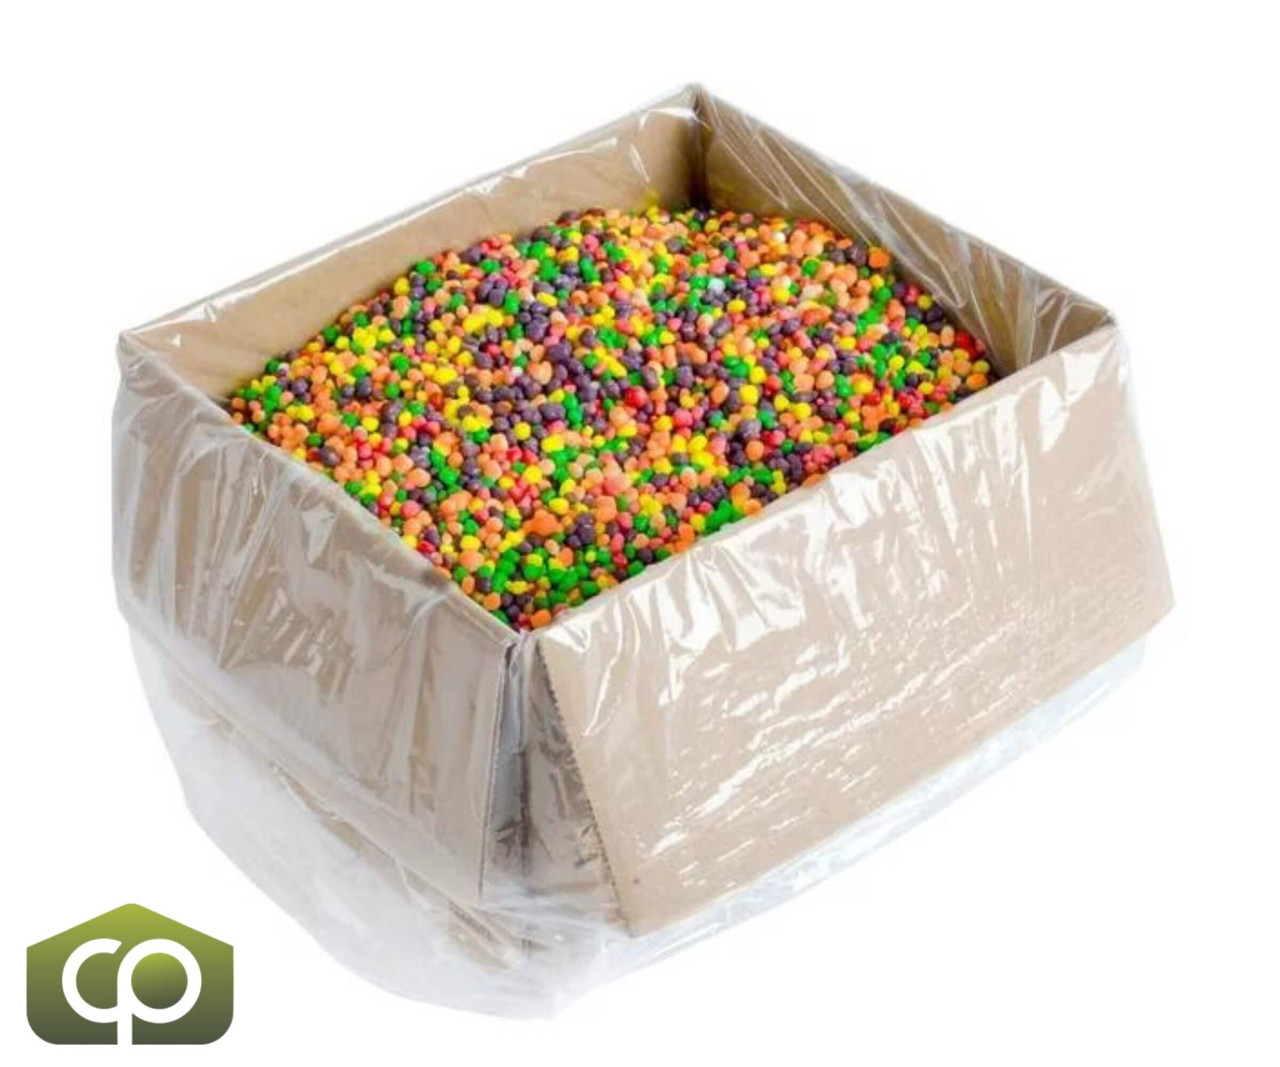 TOPPERS Nerds® Rainbow Candy Ice Cream Topping - 10 lb Bag | Vibrant Colors - Chicken Pieces